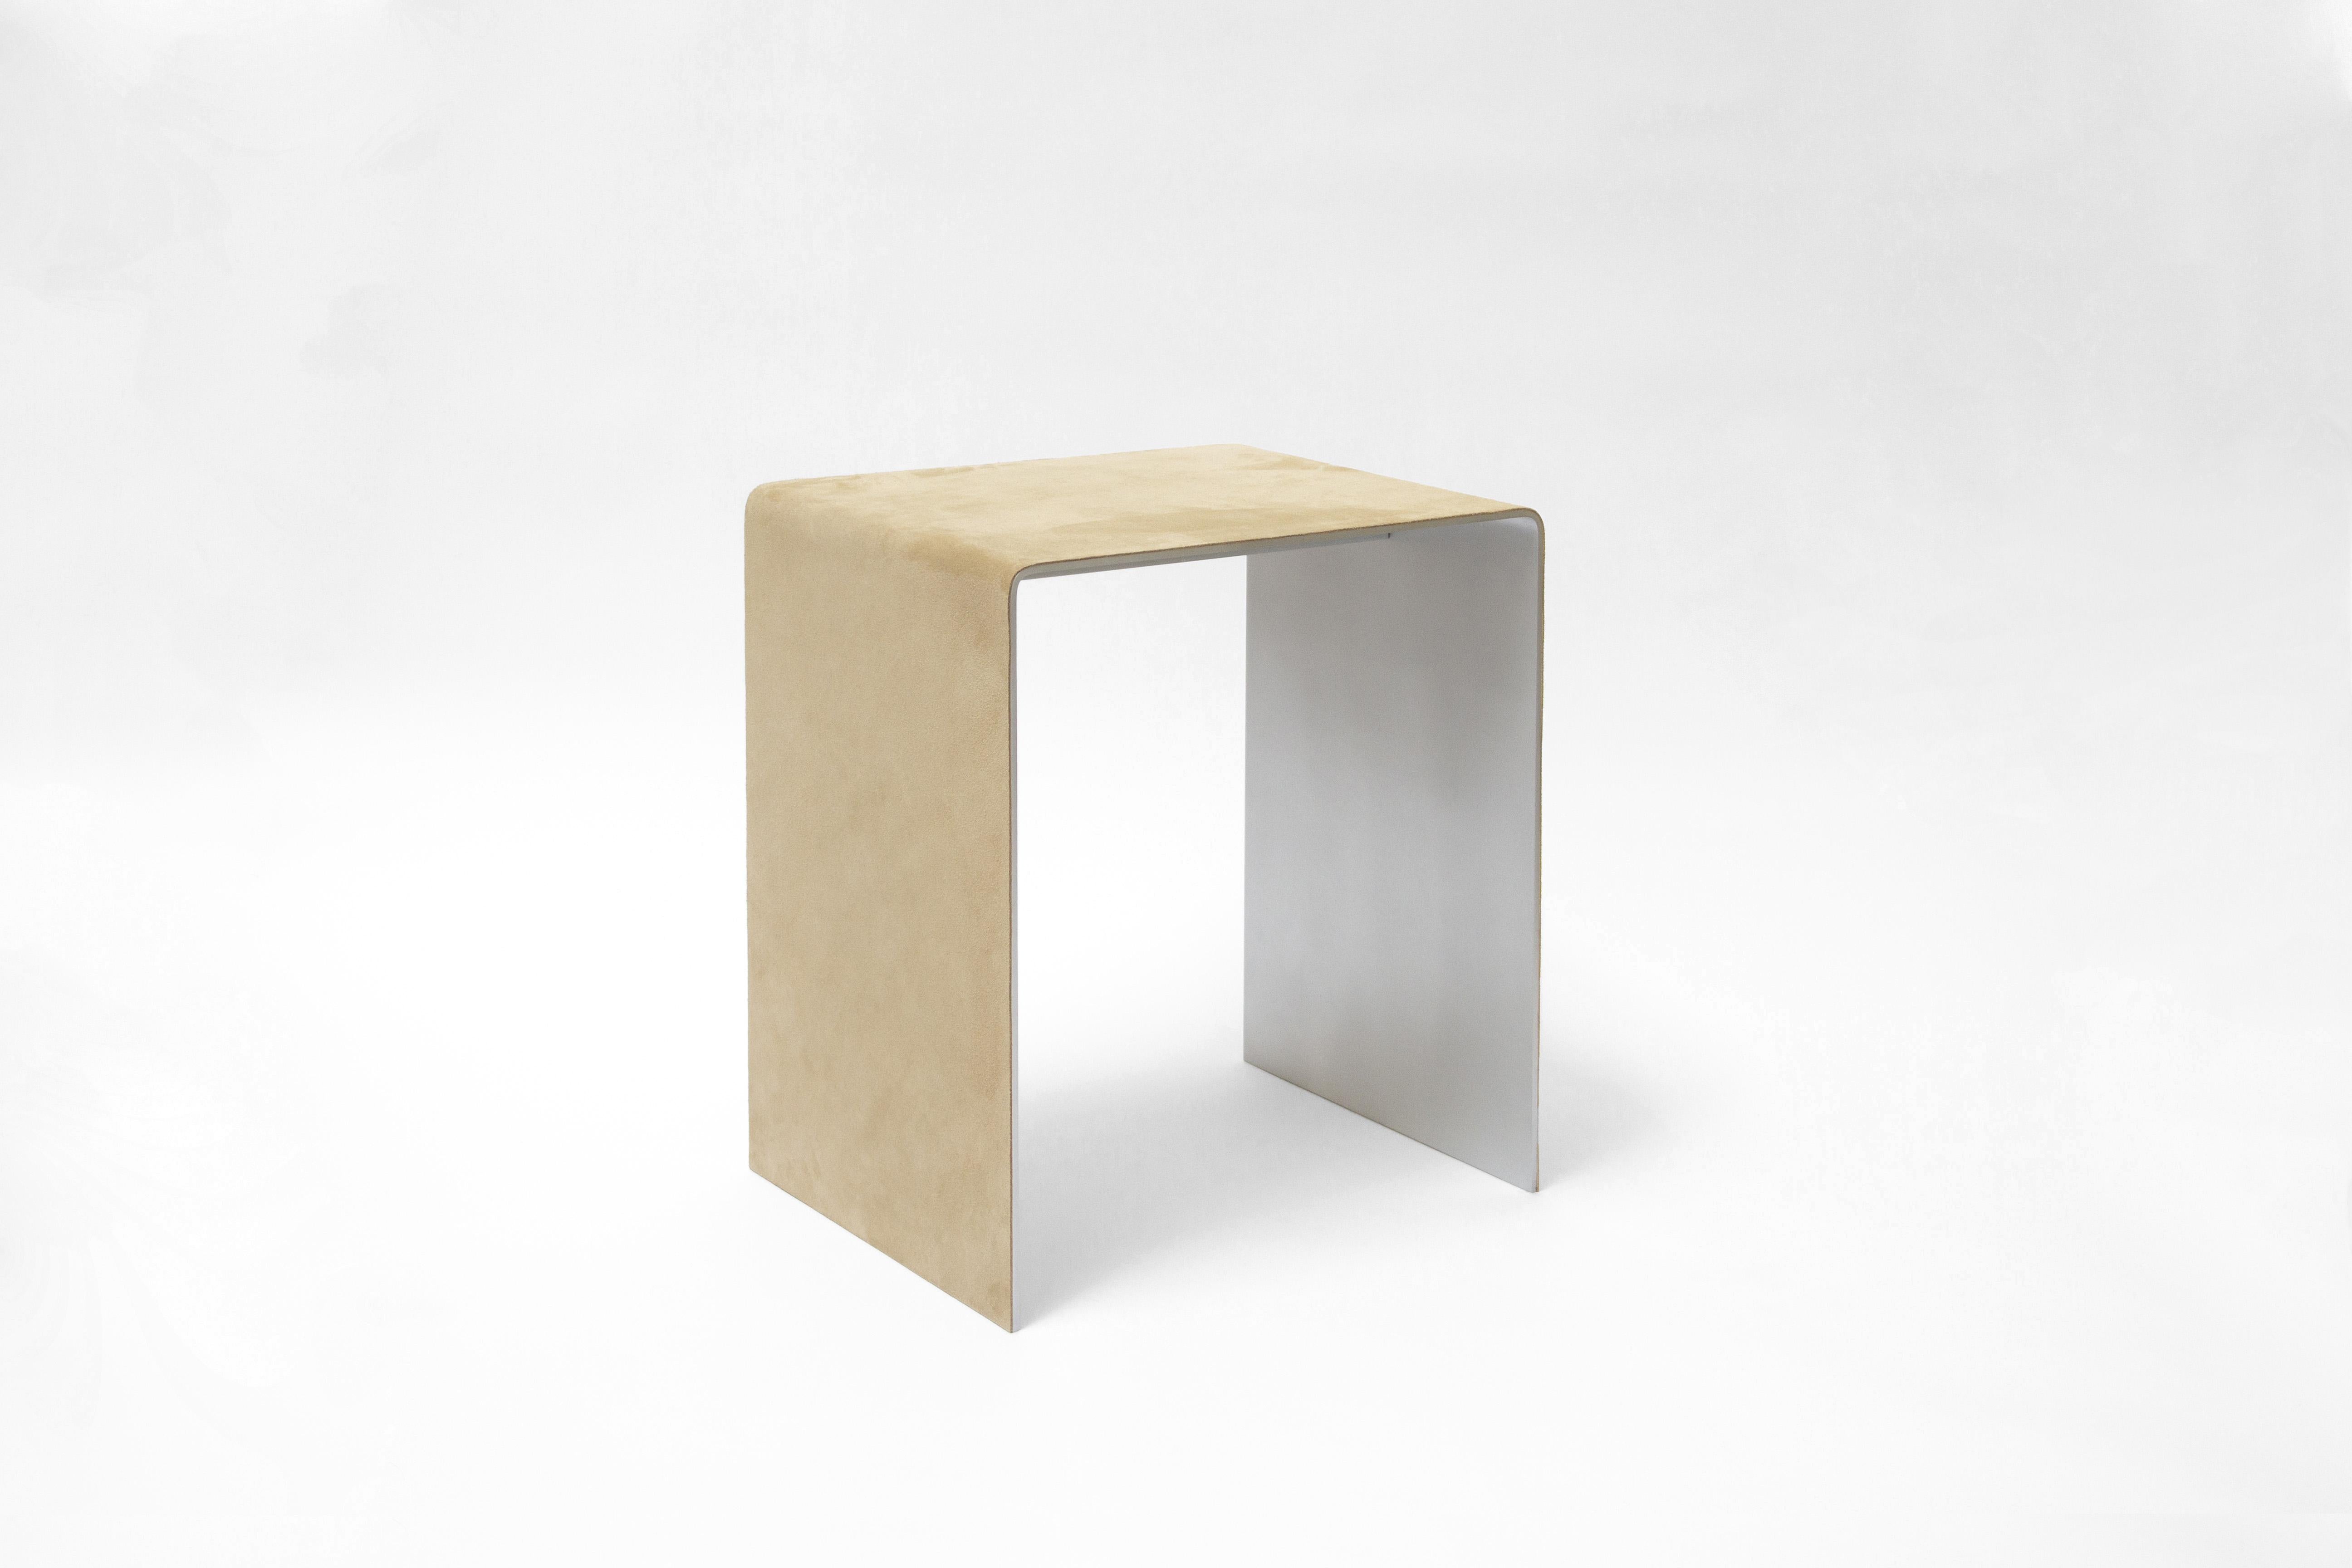 The Segment stool is part of the Segment collection: a series of pieces that intend to break down a homogenous piece and ask the question of how to produce several products composed of parts that have a similar understanding between each